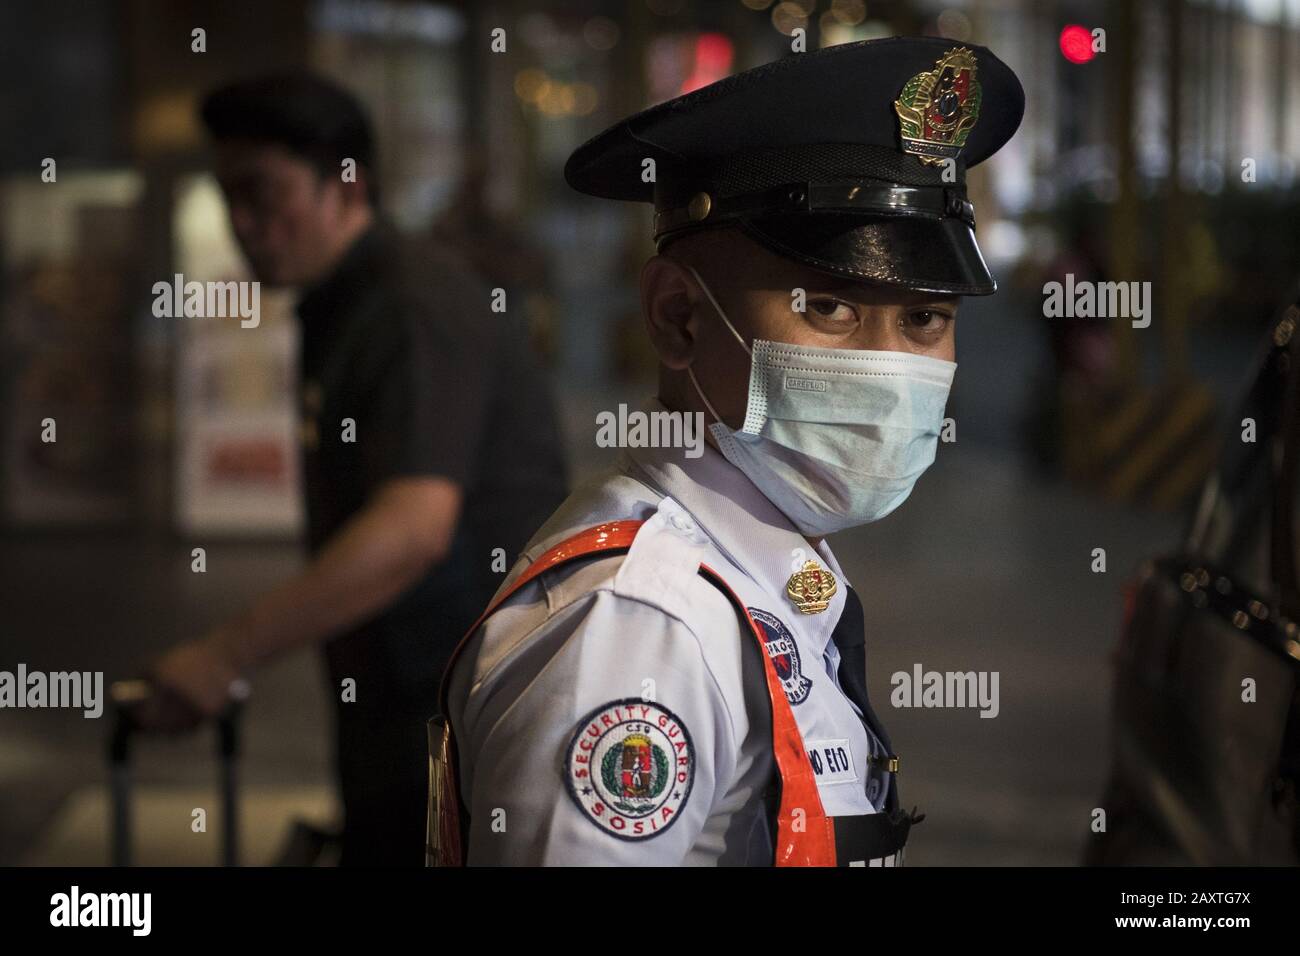 February 8, 2020, Manila, Luzon, Philippines: A security guard wears a face mask as a precaution to the outbreak of the coronavirus. Filipinos remain anxious over a new coronavirus known as Covid-19 which originated in Wuhan, China in December 2019.Â The Philippinesâ€™ Department of Health announced the countryâ€™s first death due to the virus on 2 February - the first reported death outside of China. The number of 2019-nCoV cases worldwide has already surpassed that of the 2003 Sars epidemic, with the death toll now over 1300. (Credit Image: © Oliver Haynes/SOPA Images via ZUMA Wire) Stock Photo